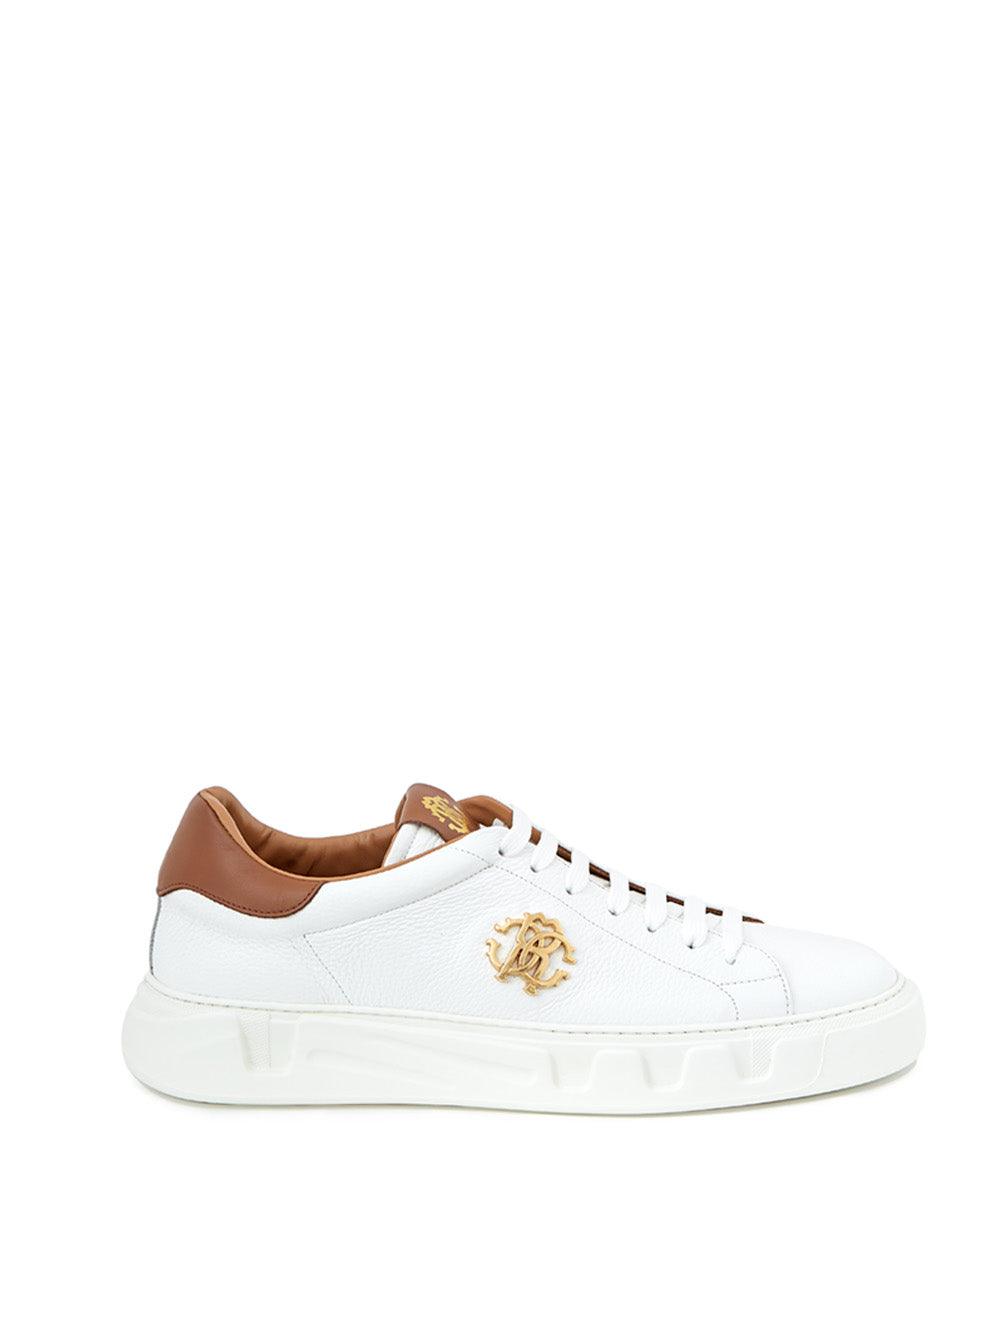 Roberto Cavalli White Leather Sneakers with Gold Logo - Ellie Belle